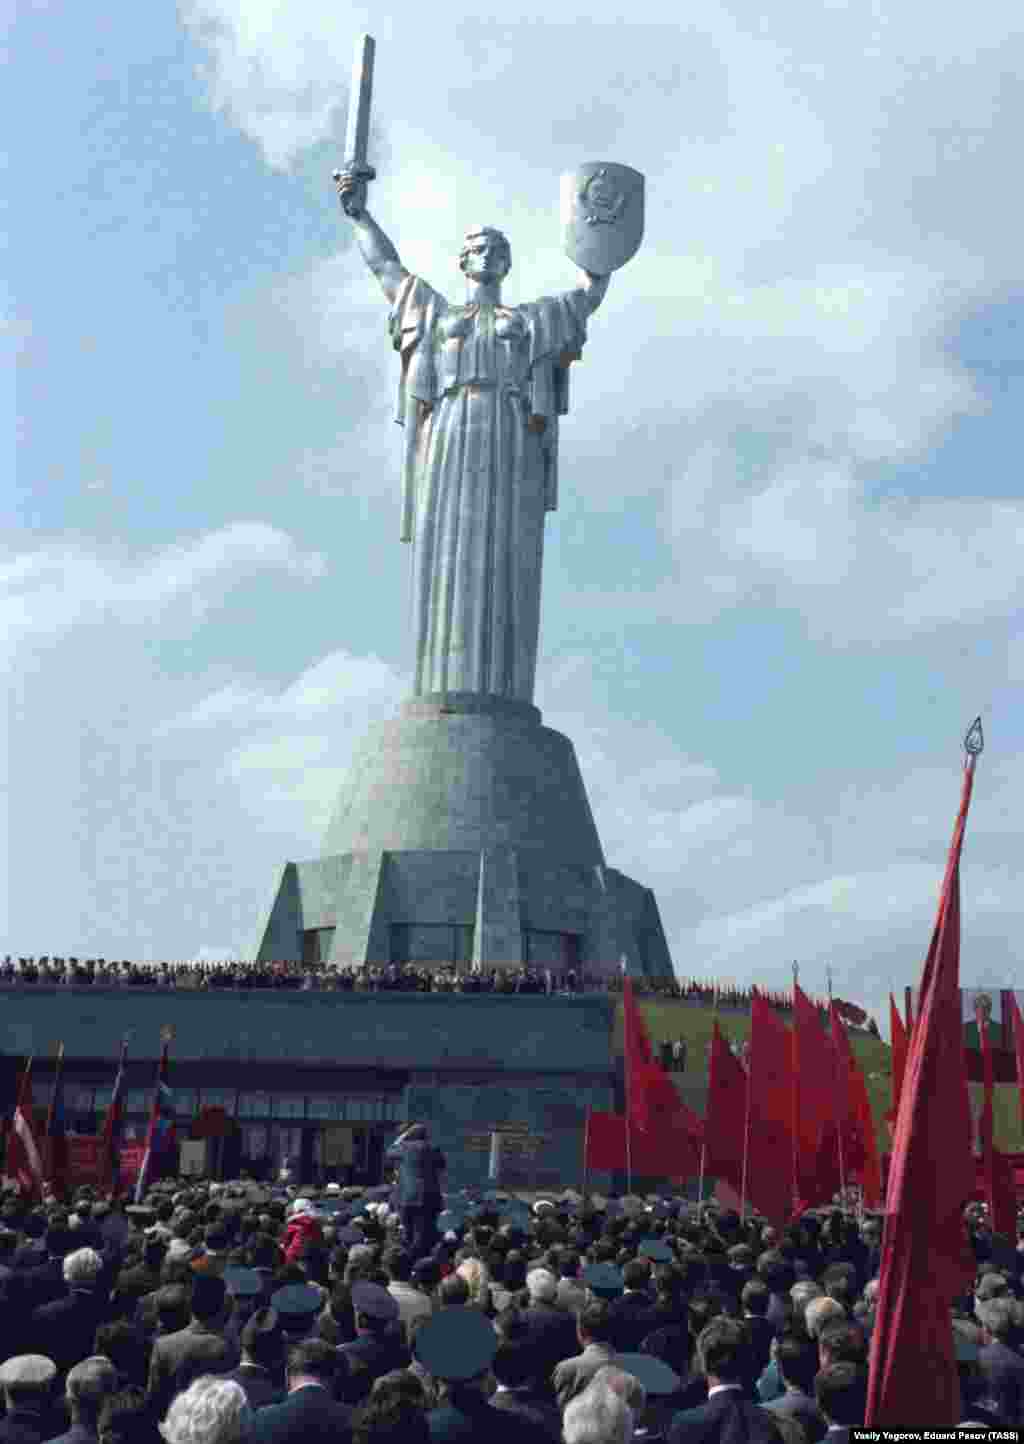 The opening ceremony for the Motherland Monument on May 9, 1981. Soviet leader Leonid Brezhnev can be seen (lower left) speaking during the event.&nbsp;